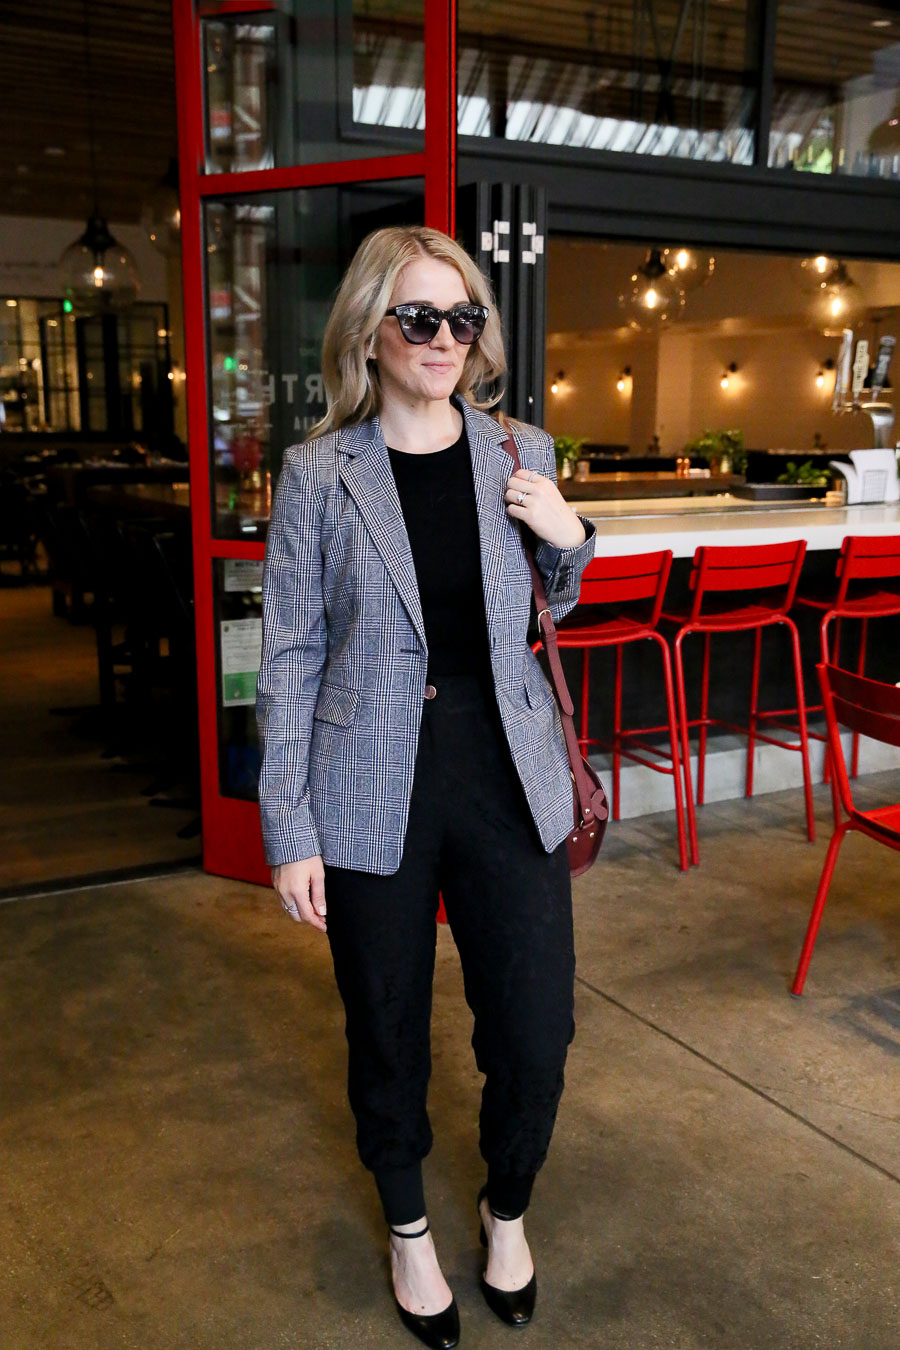 How to Wear Jogger Pants to Work with Plaid Blazer - Fall Outfit Idea